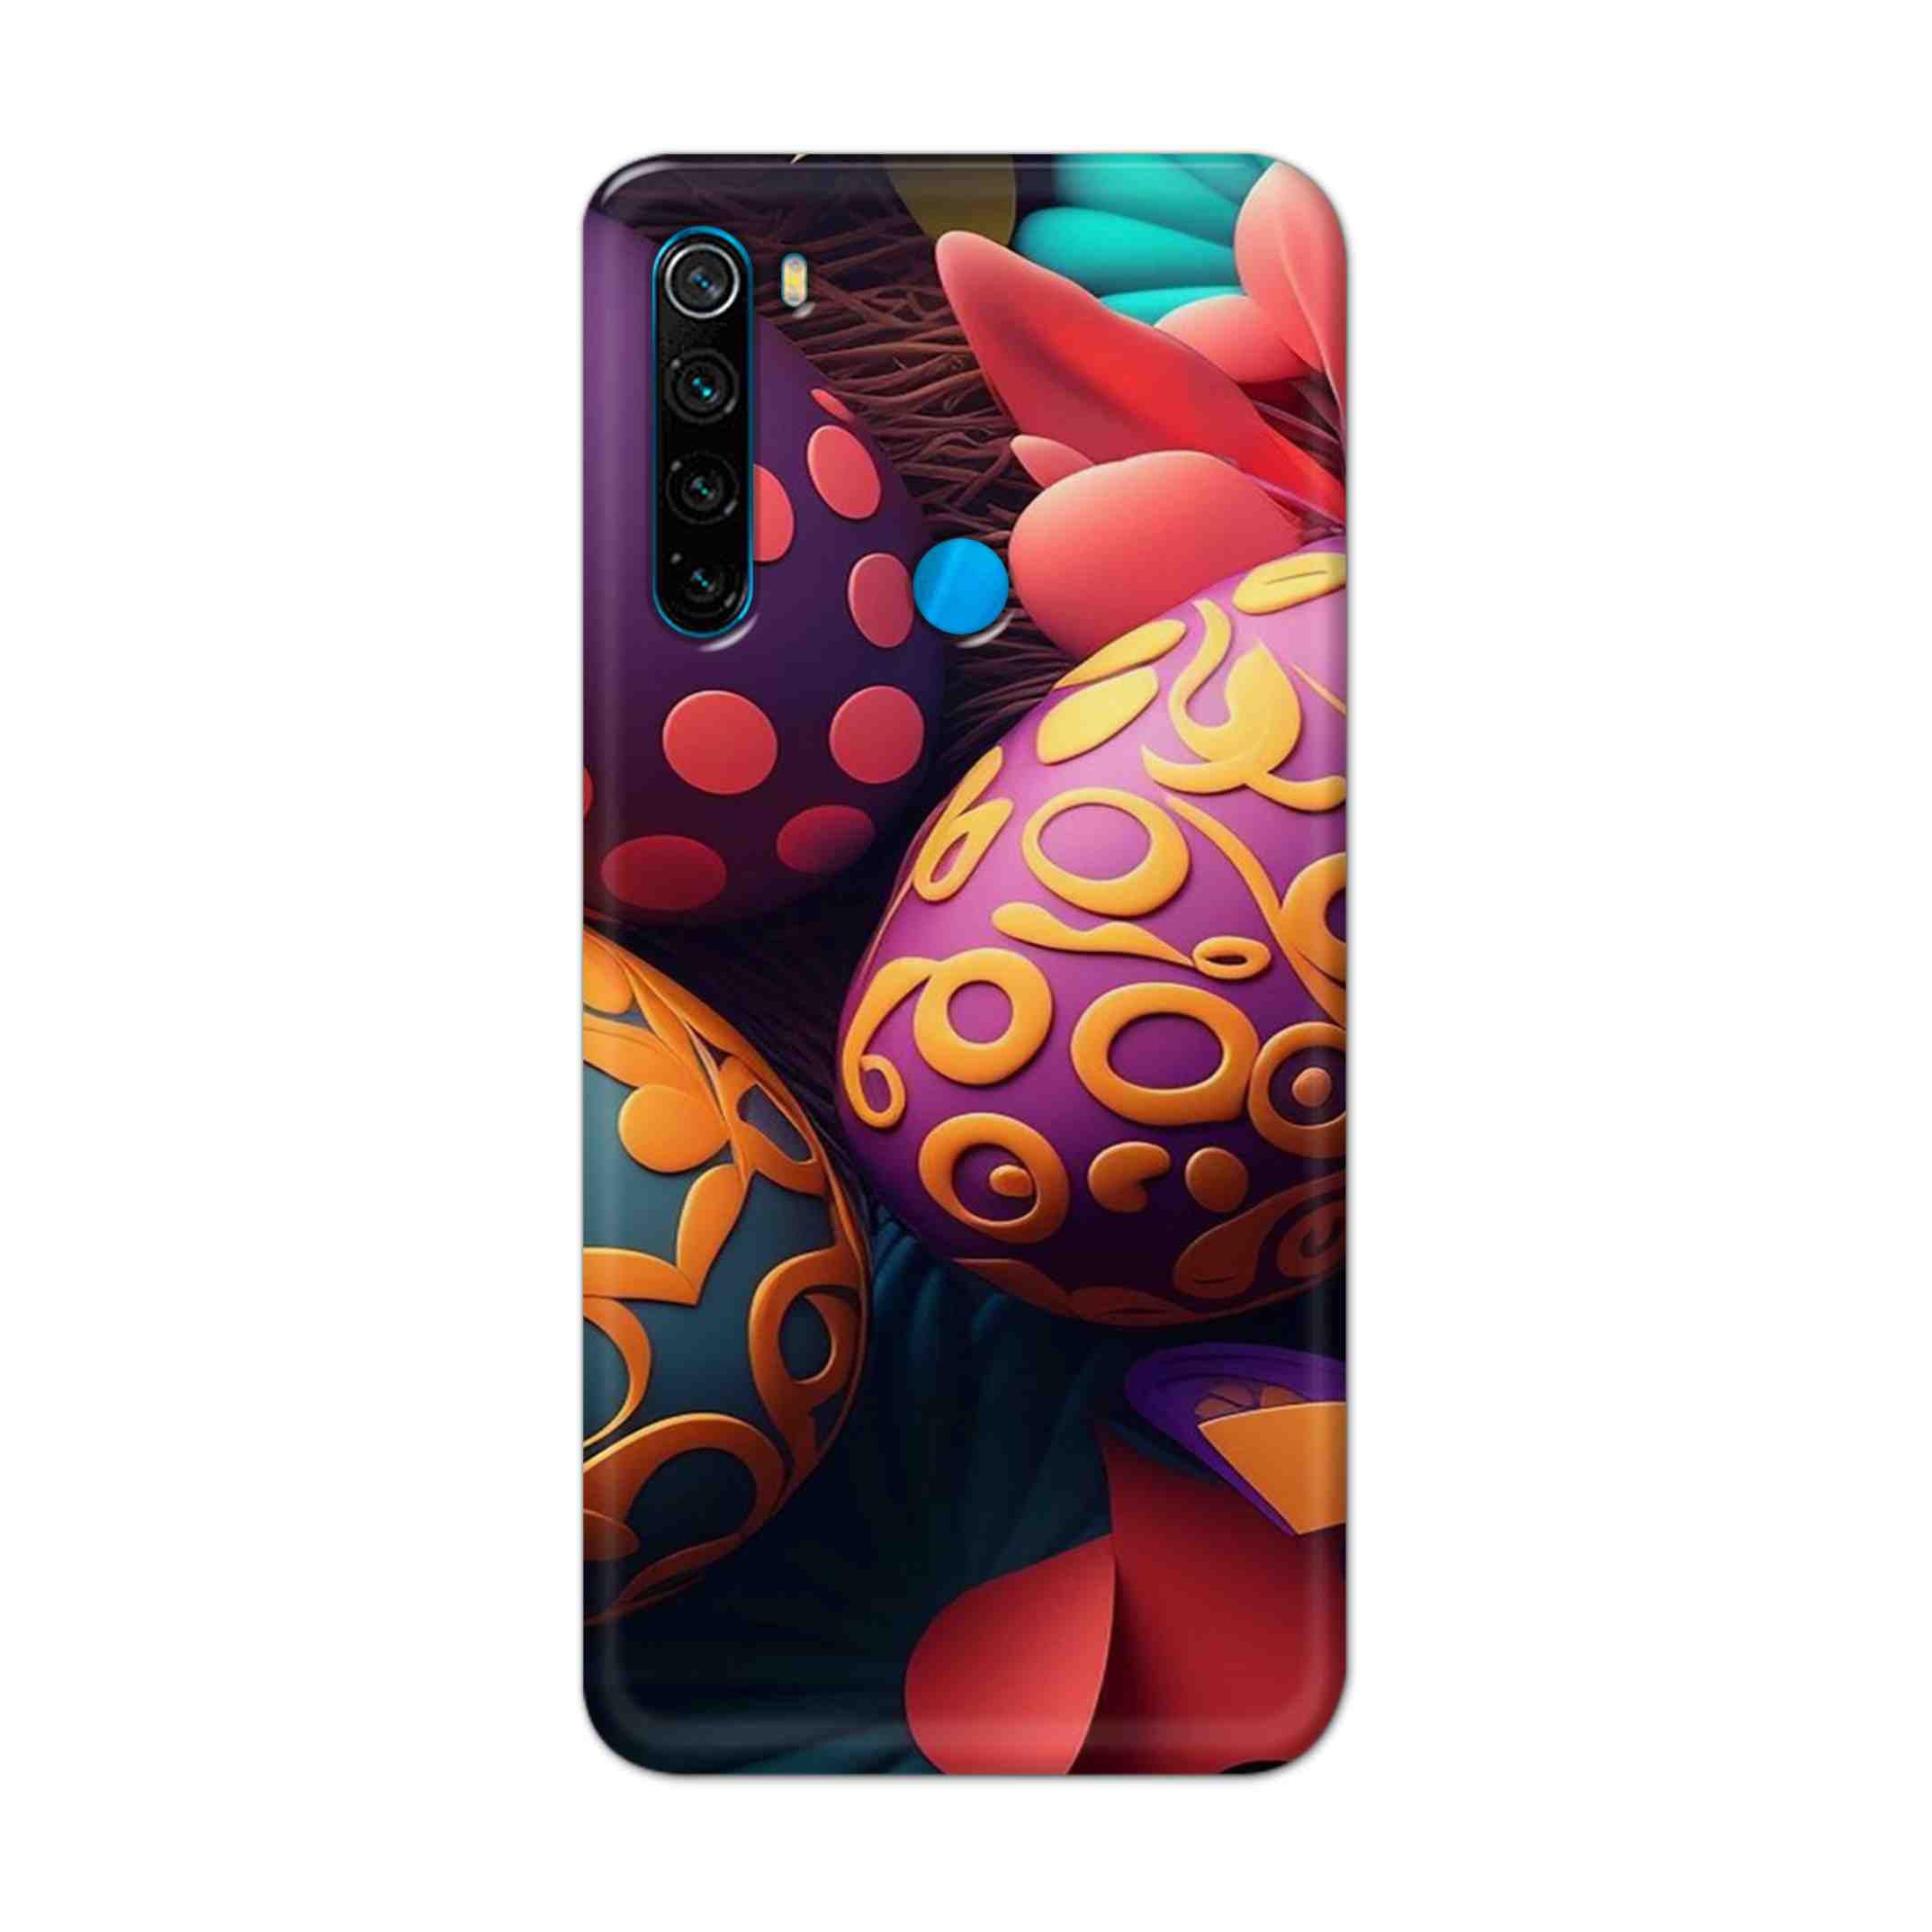 Buy Easter Egg Hard Back Mobile Phone Case Cover For Xiaomi Redmi Note 8 Online